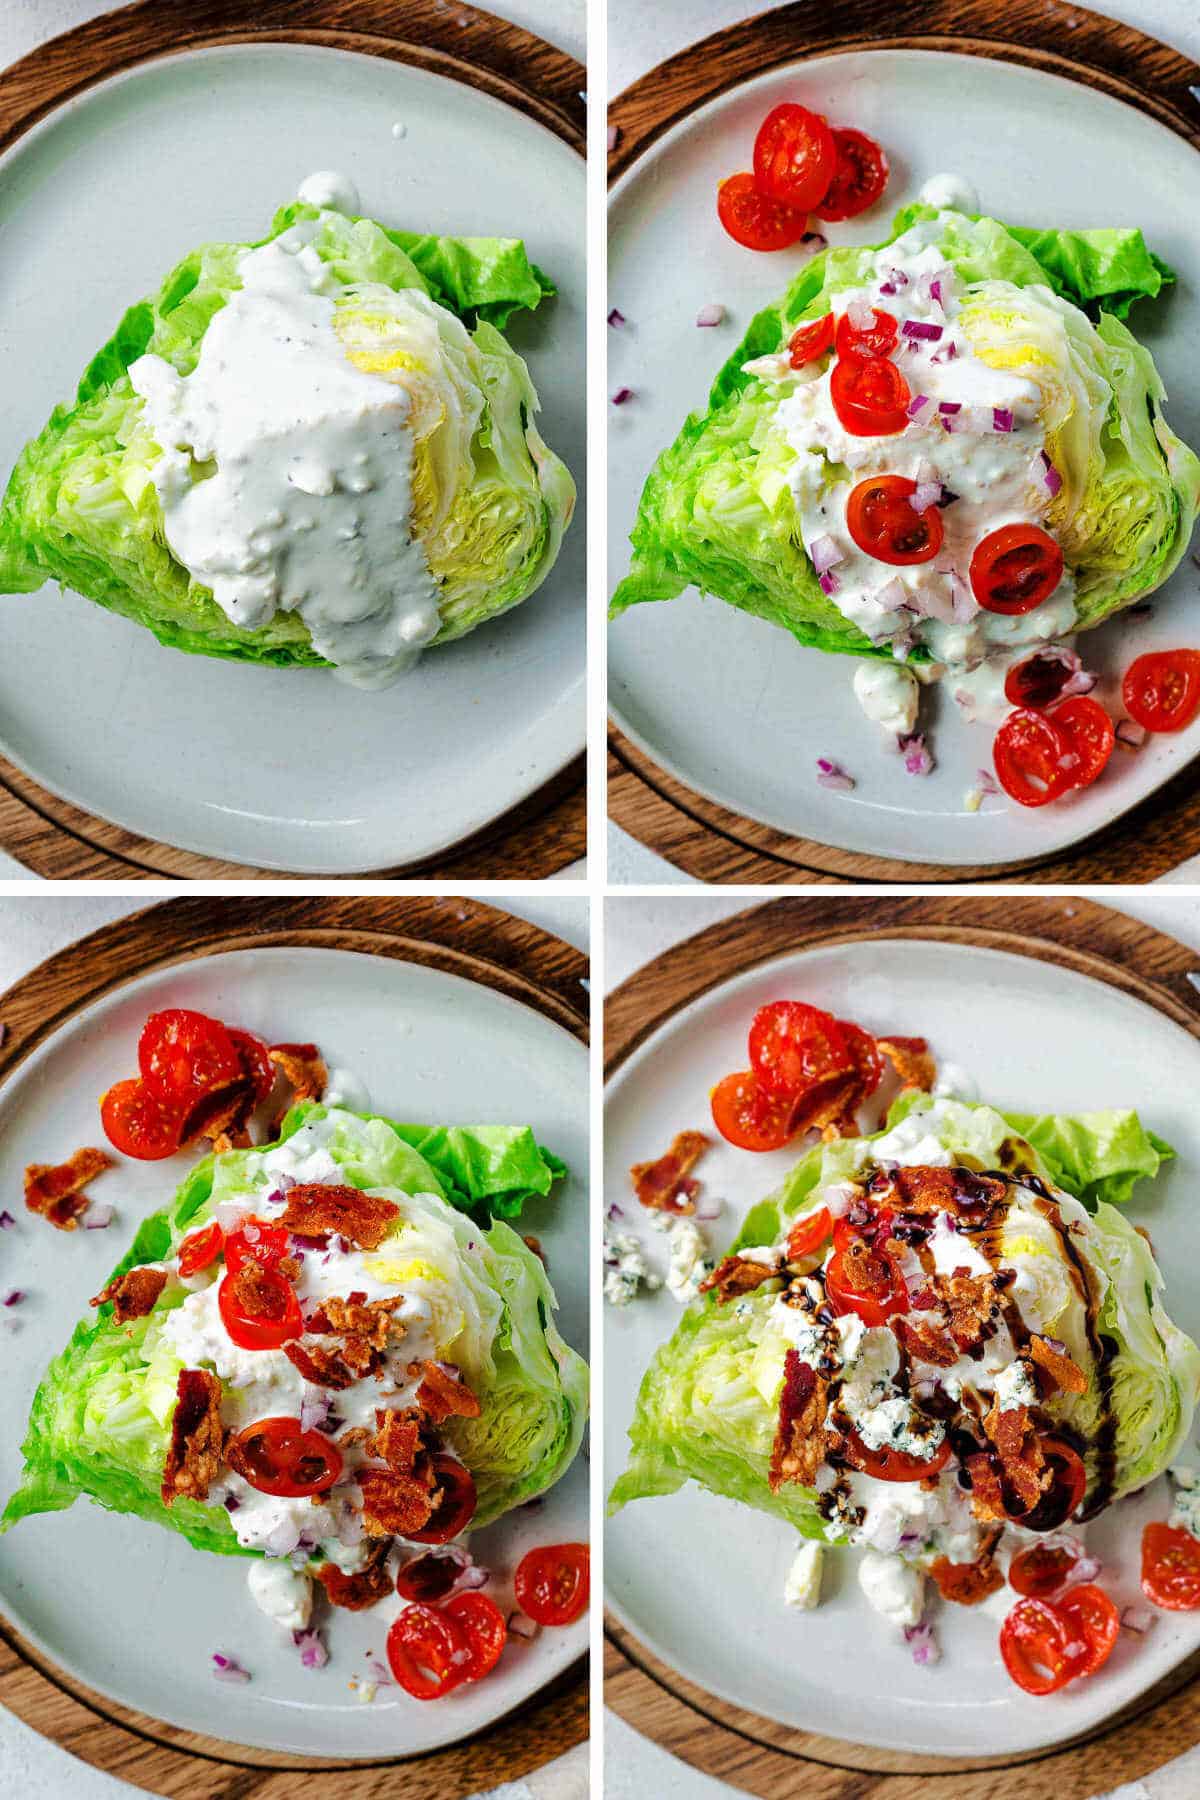 Layering blue cheese dressing over a wedge of lettuce; a wedge of lettuce on a plate with dressing, tomatoes, onions, and bacon.